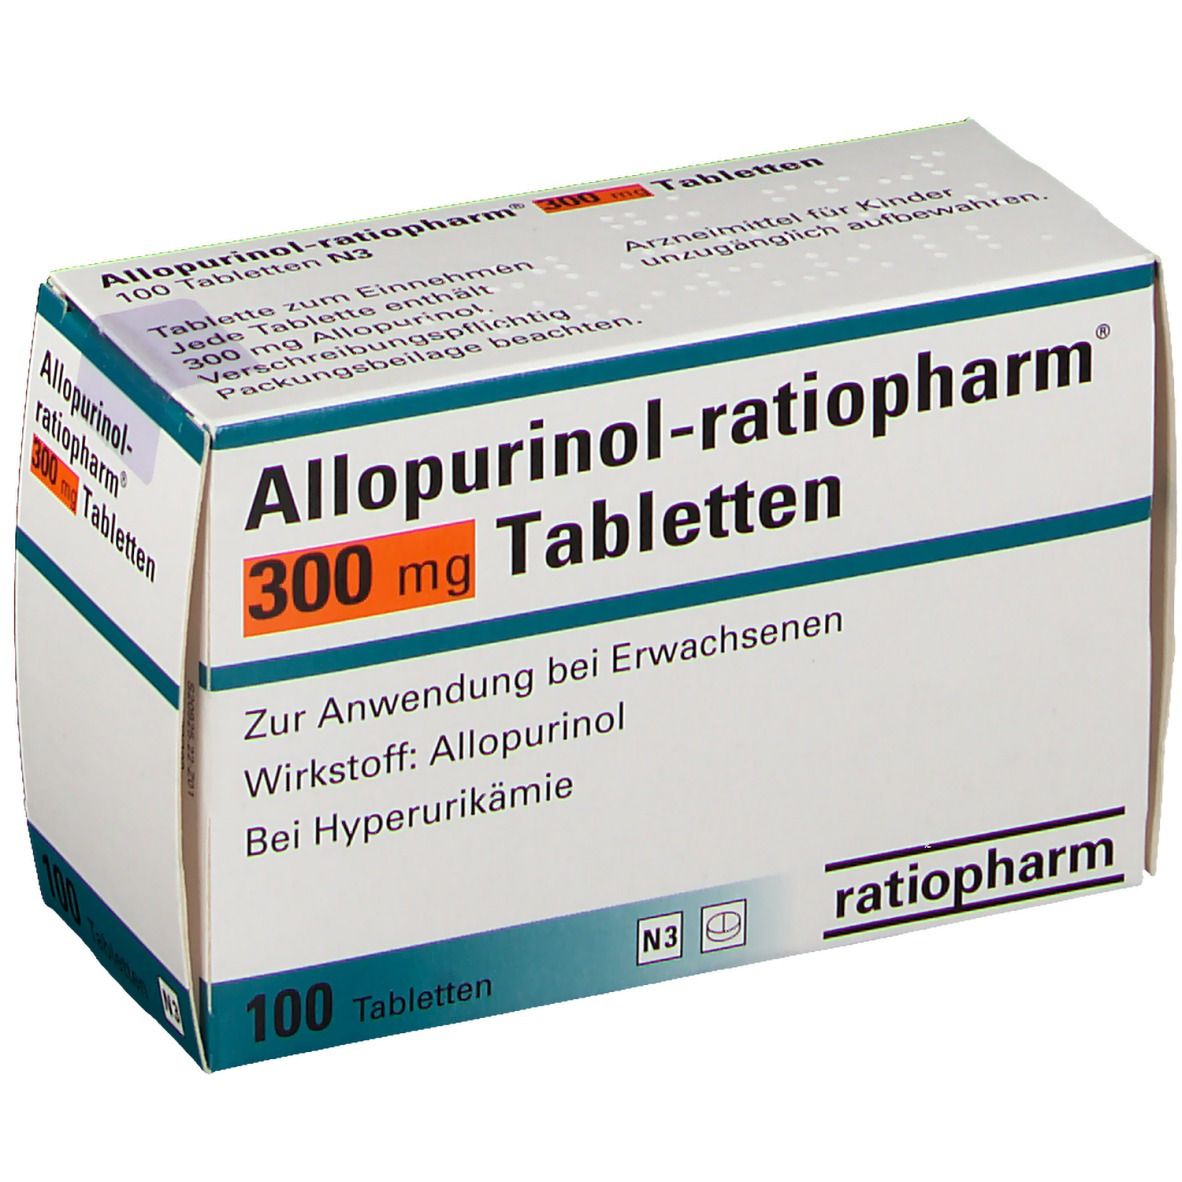 Allopurinol – Uses, Side Effects, Indications, and Usage Notes